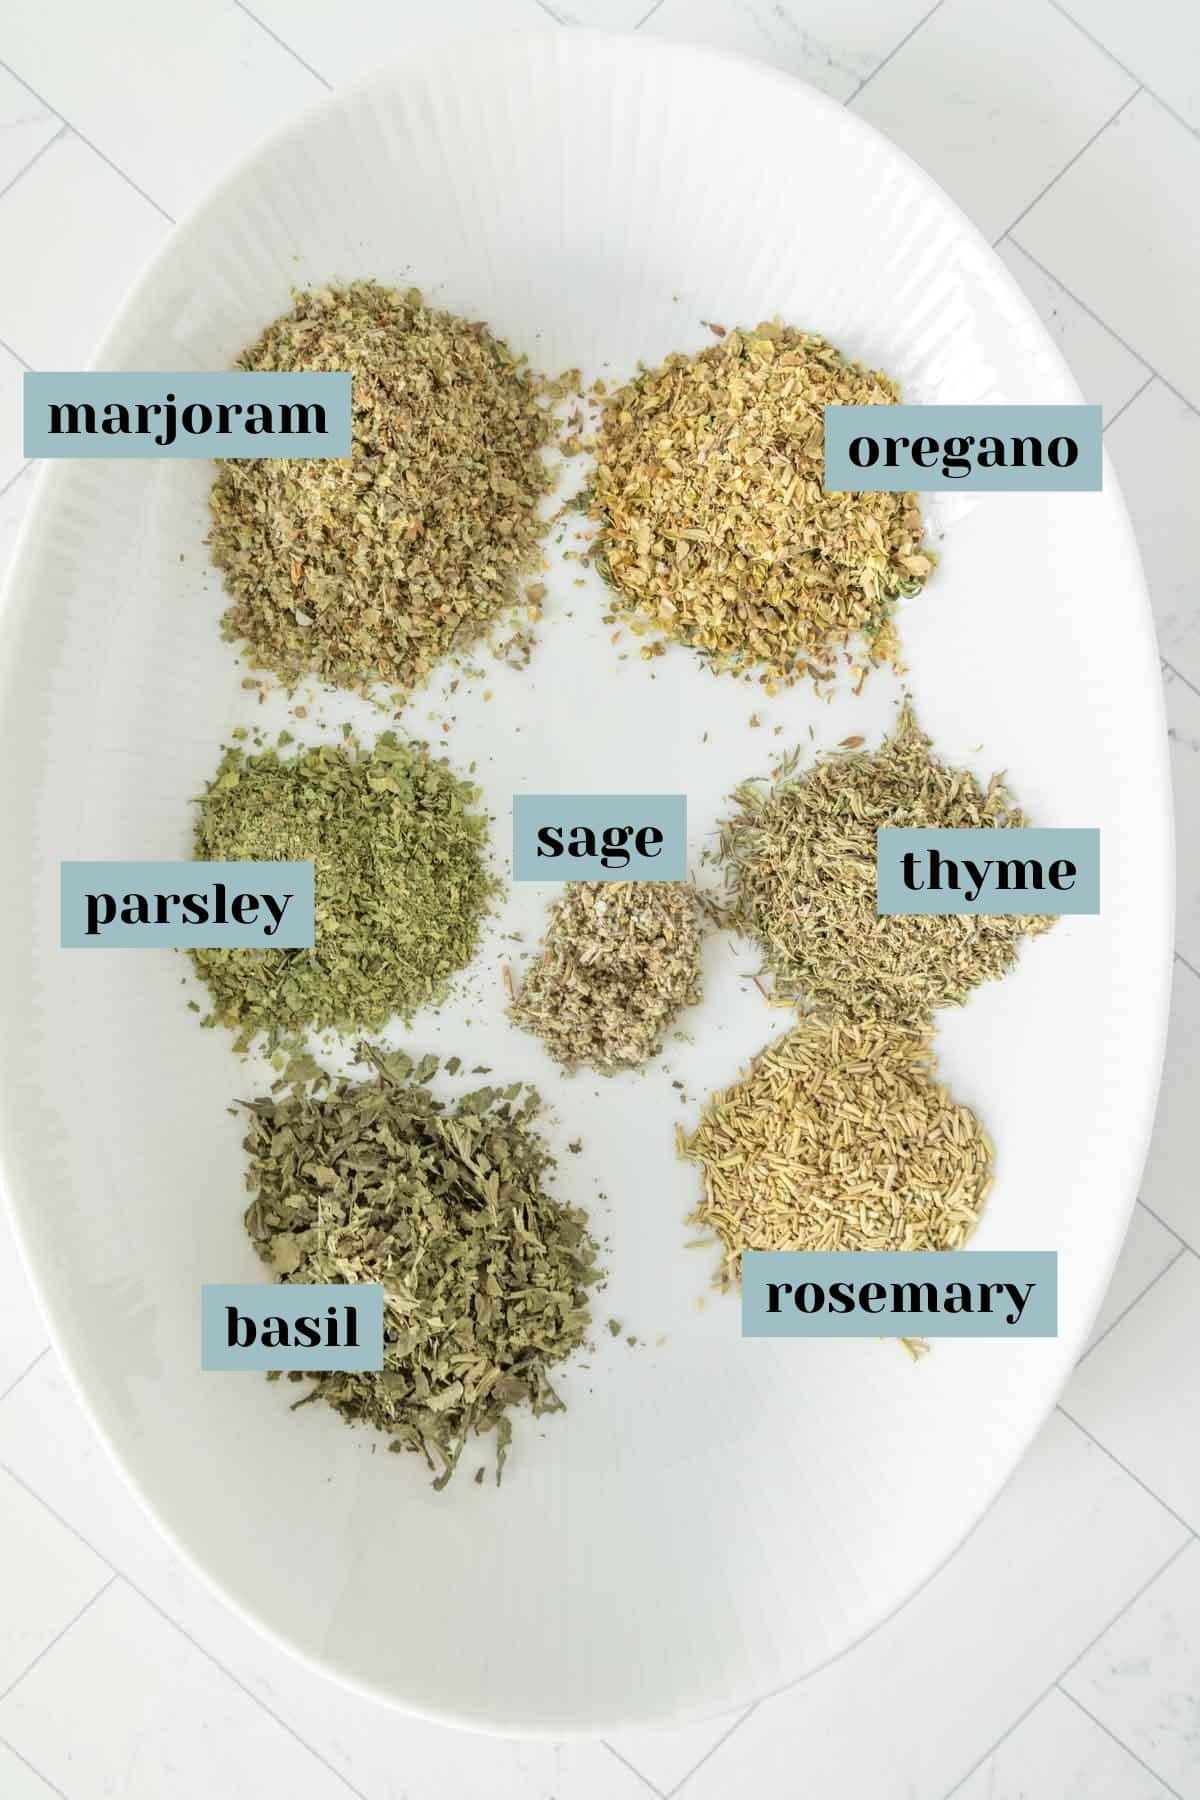 Herbs and spices on a white plate.